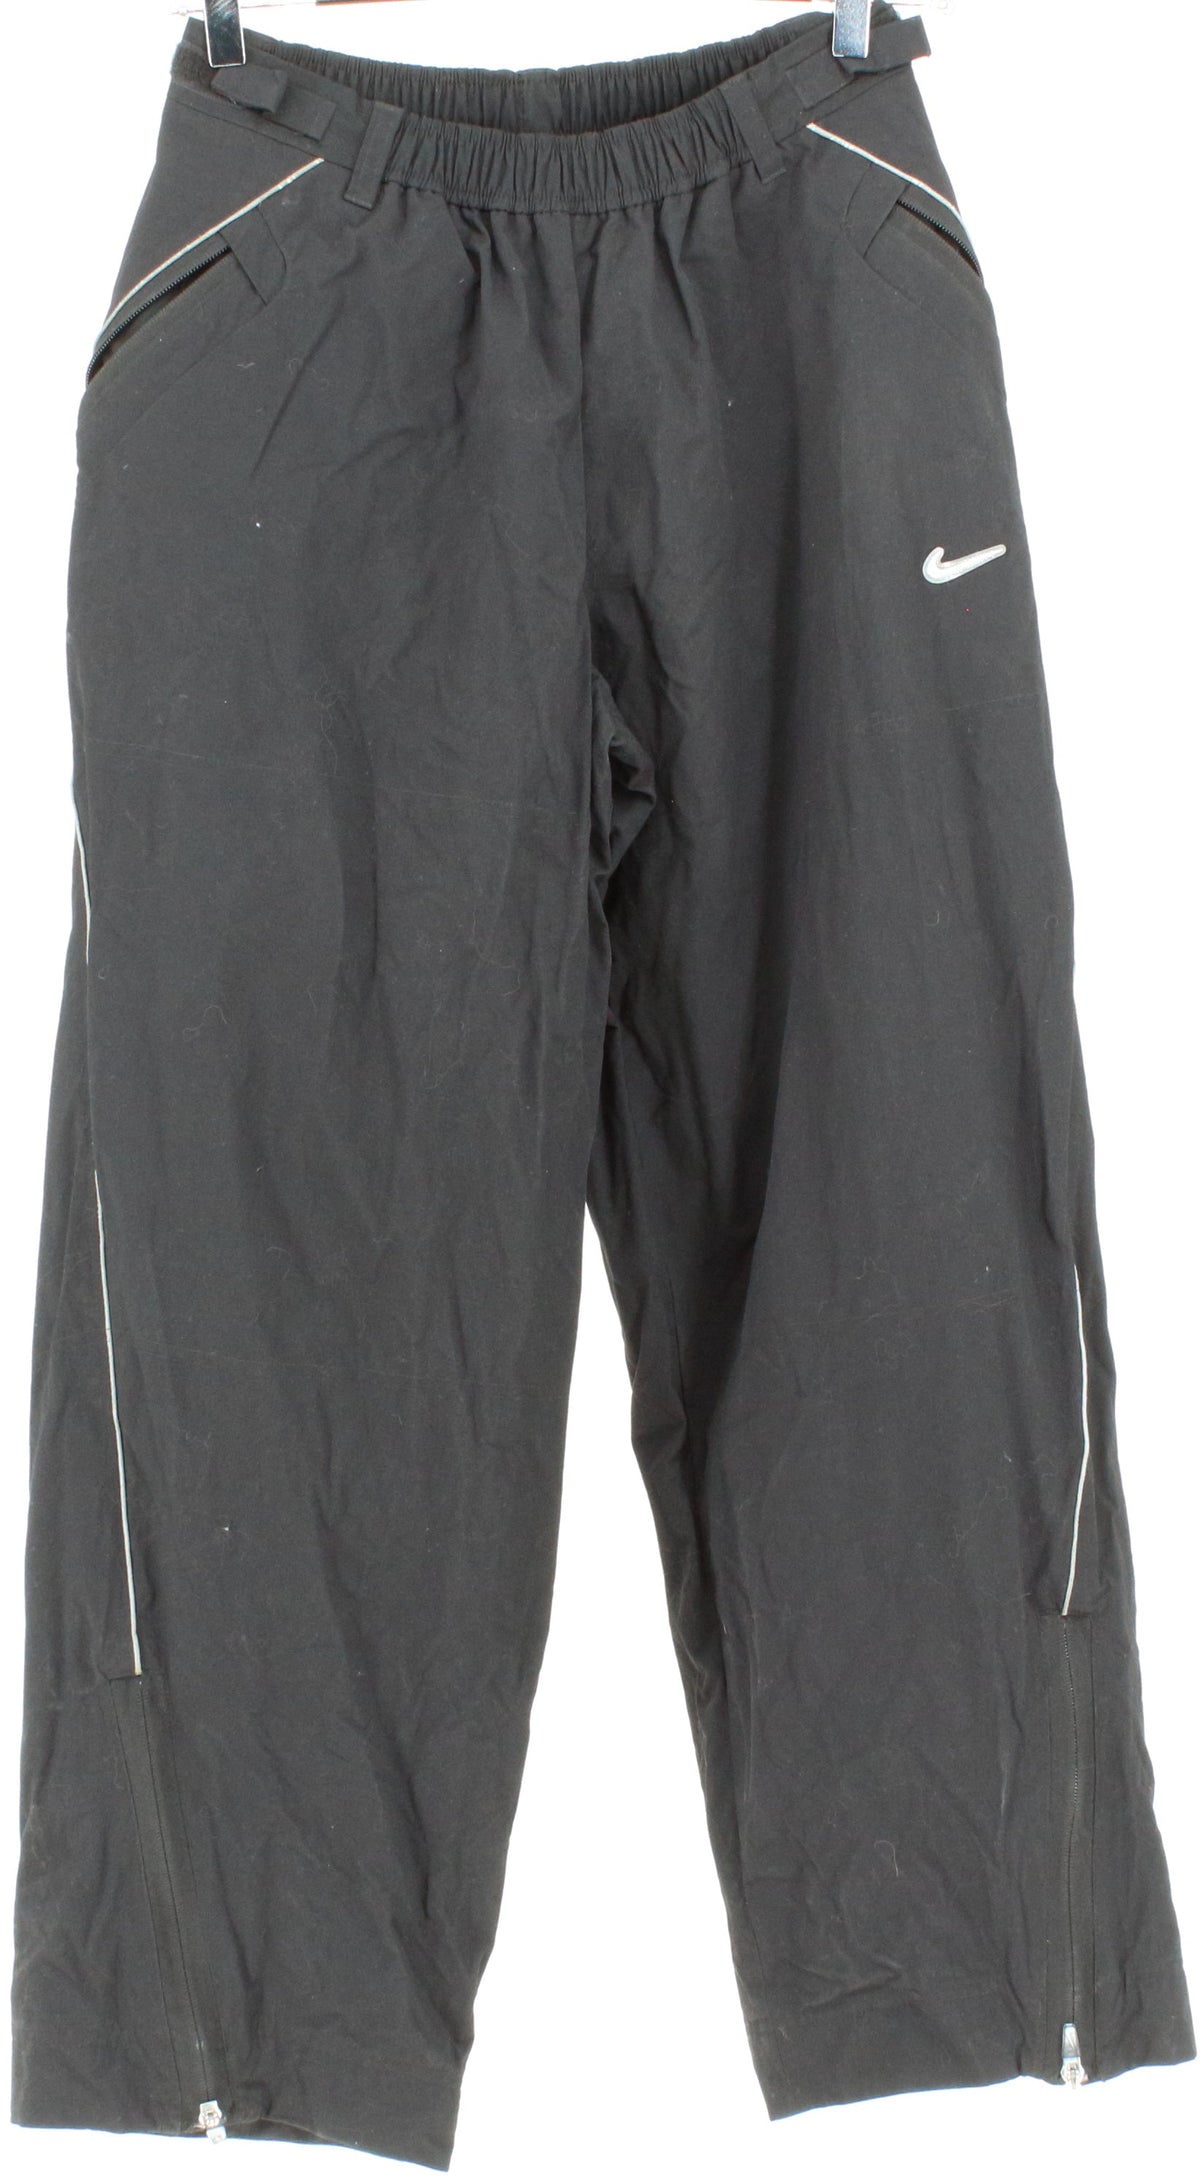 Nike Black Kids Pants With Grey Piping Sides